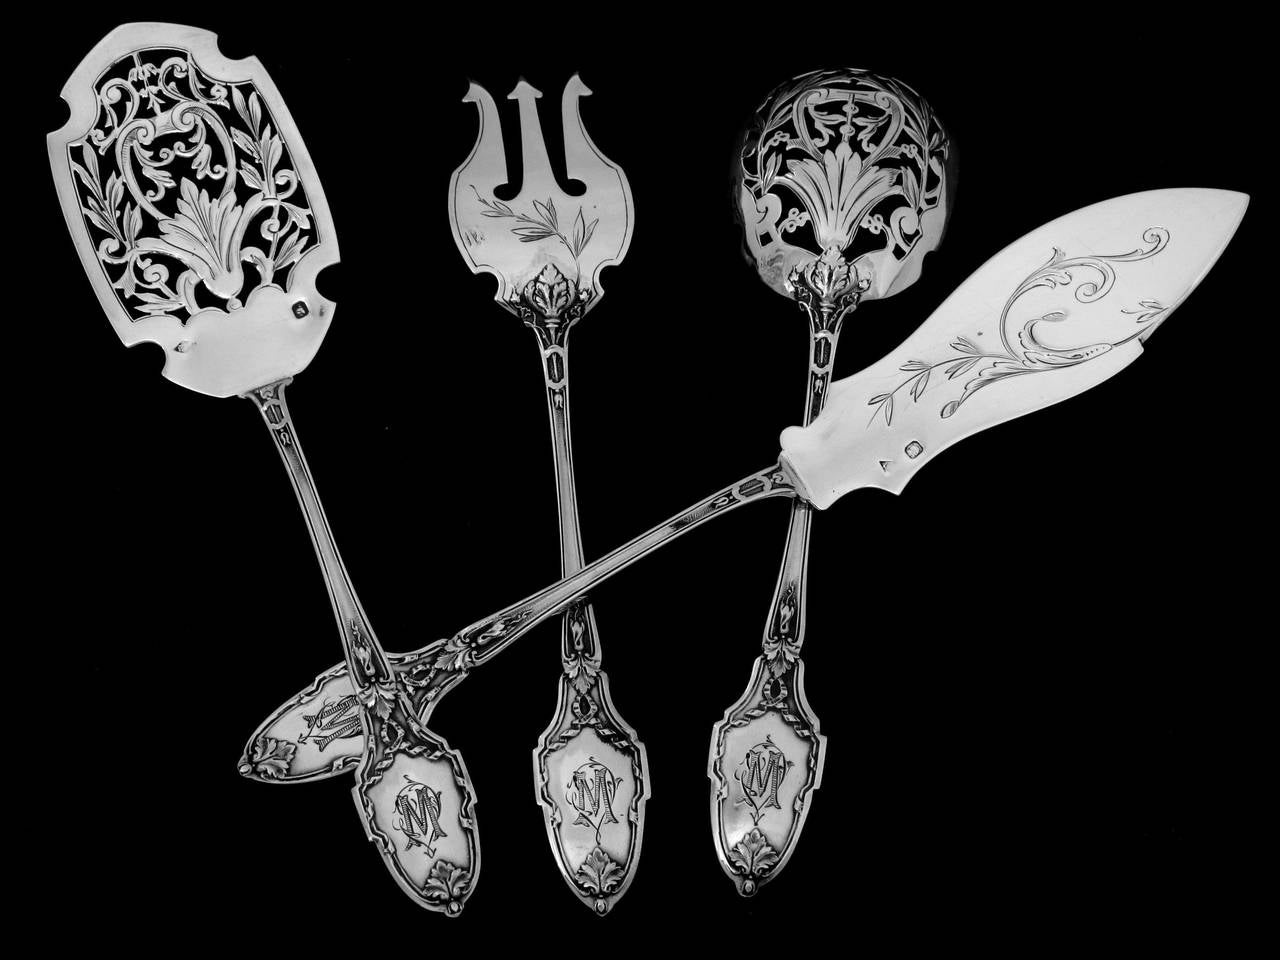 Gorgeous French All Sterling Silver Hors D'oeuvre Set 4 pc w/box Louis XVI-style 1